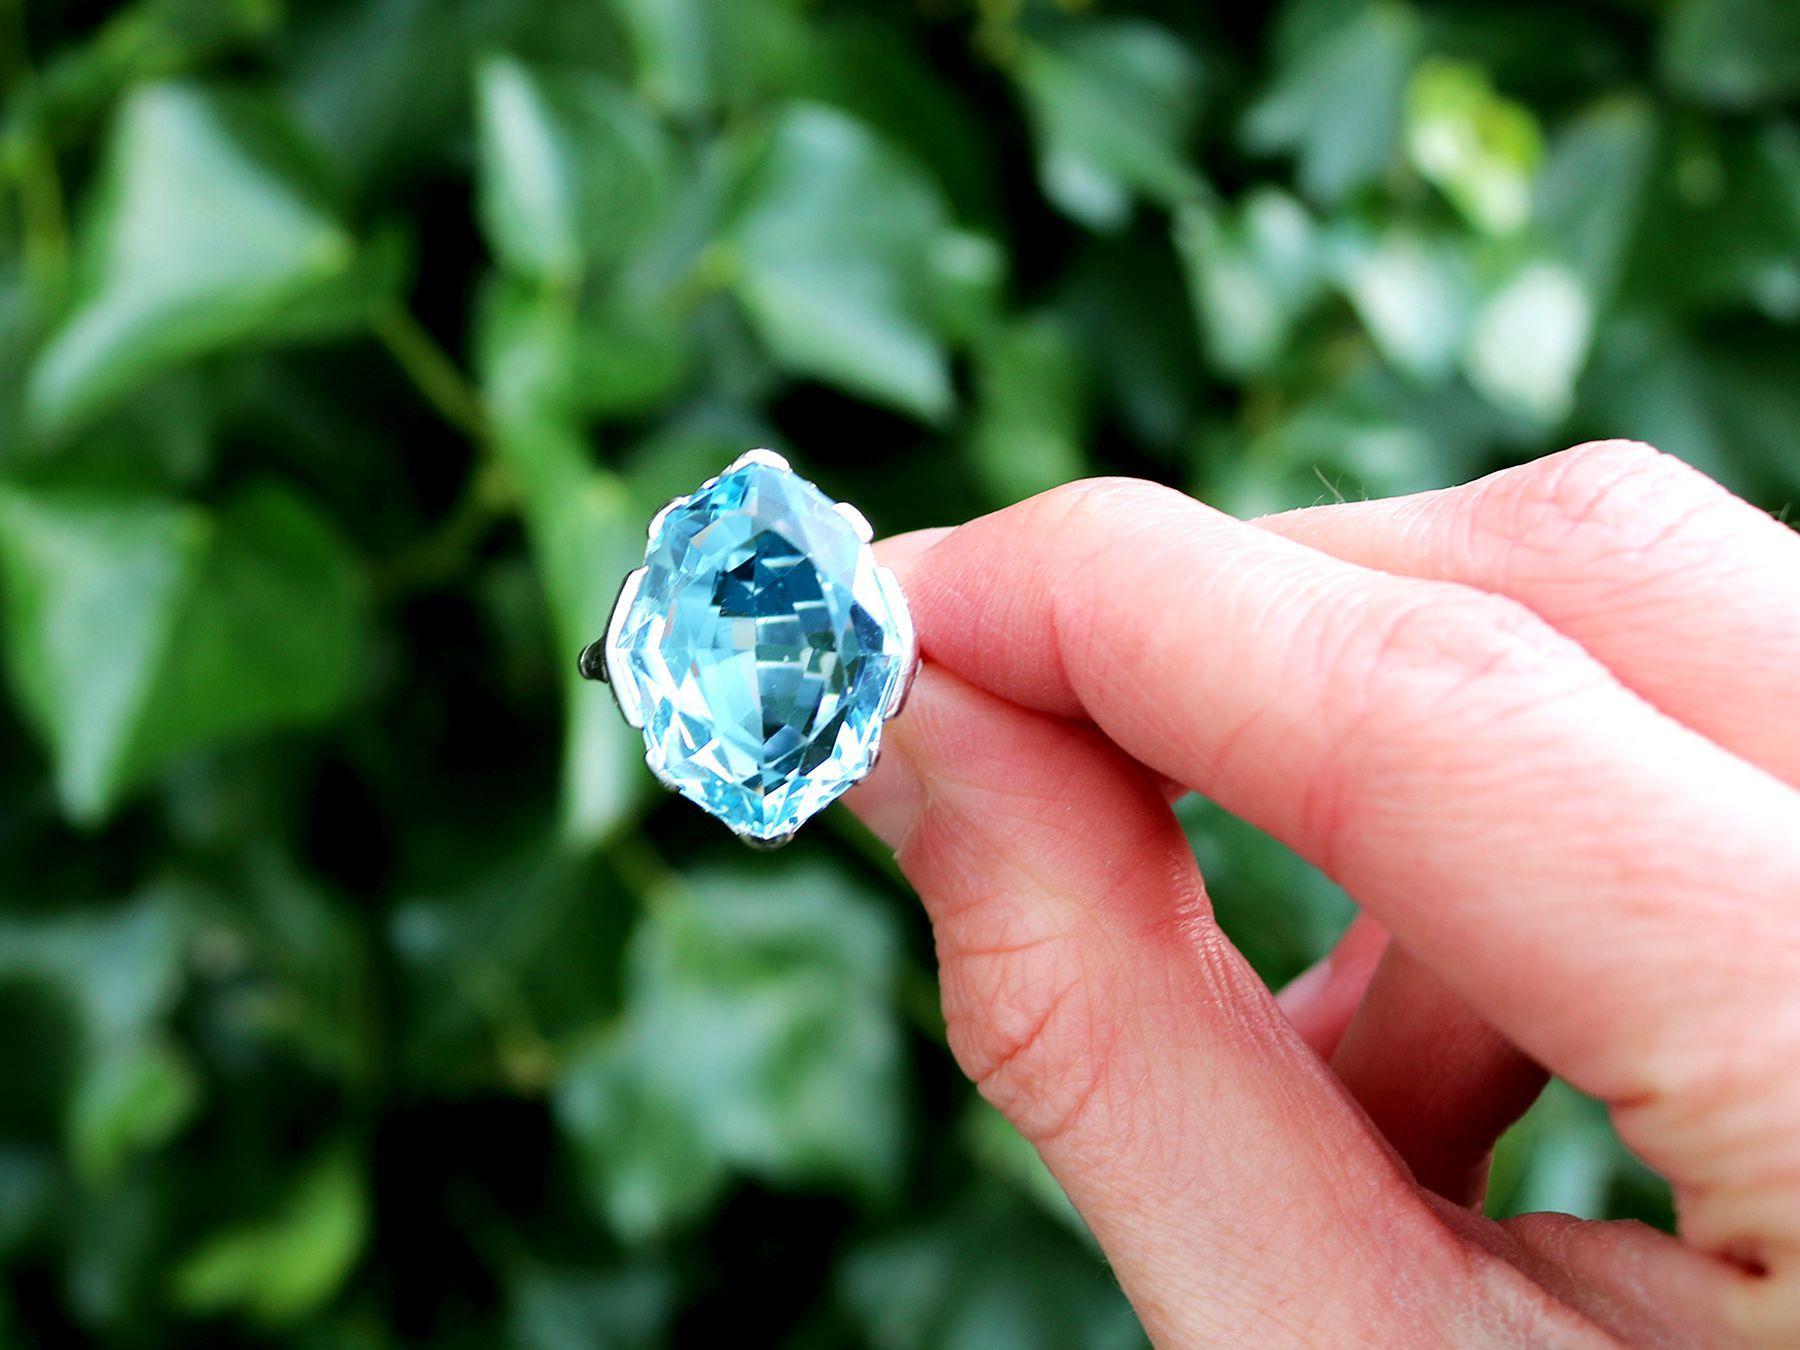 A stunning, fine and impressive 14.35 carat aquamarine and 0.20 carat diamond, 18 karat white gold ring; part of our diverse vintage jewelry and estate jewelry collections.

This stunning fine and impressive aquamarine ring has been crafted in 18k